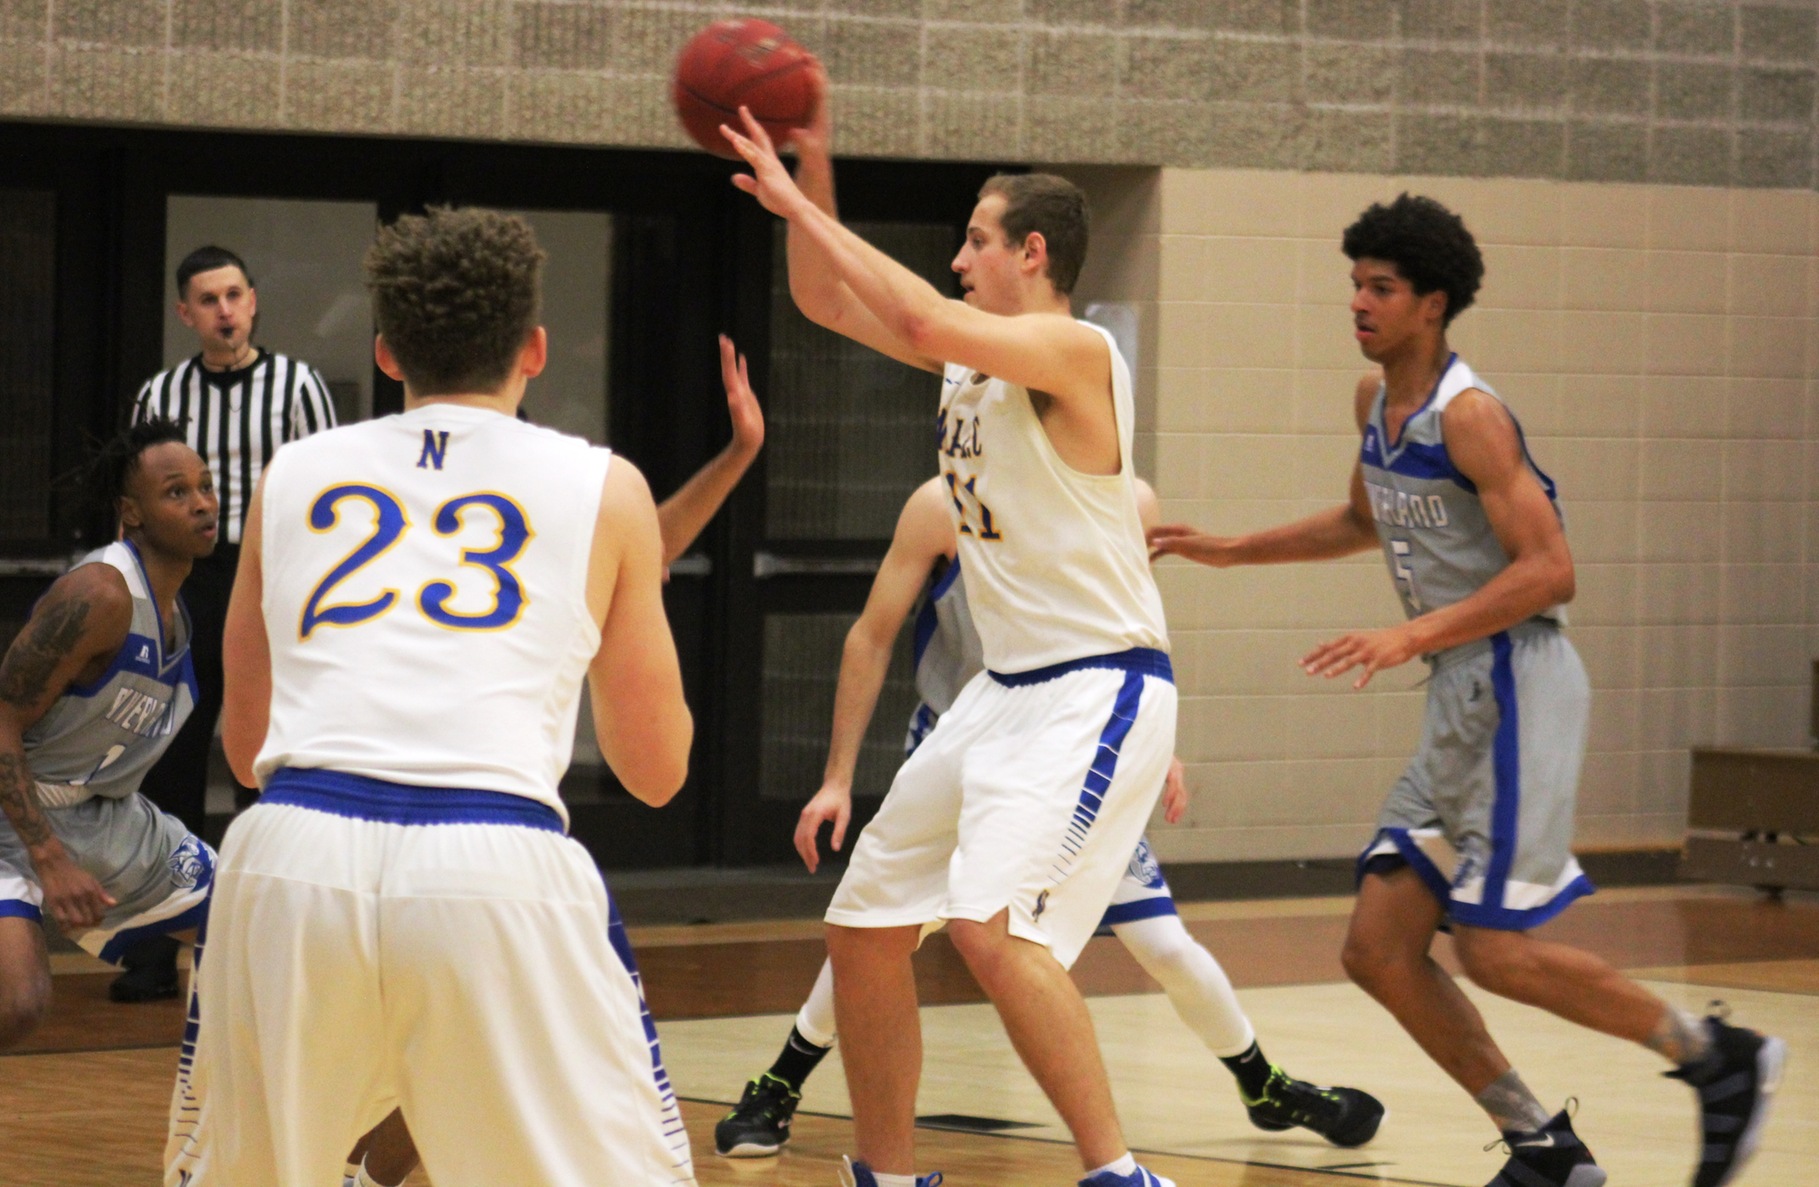 NIACC's Jaycob Payne passes the ball in the first half of Tuesday's game against Riverland CC.